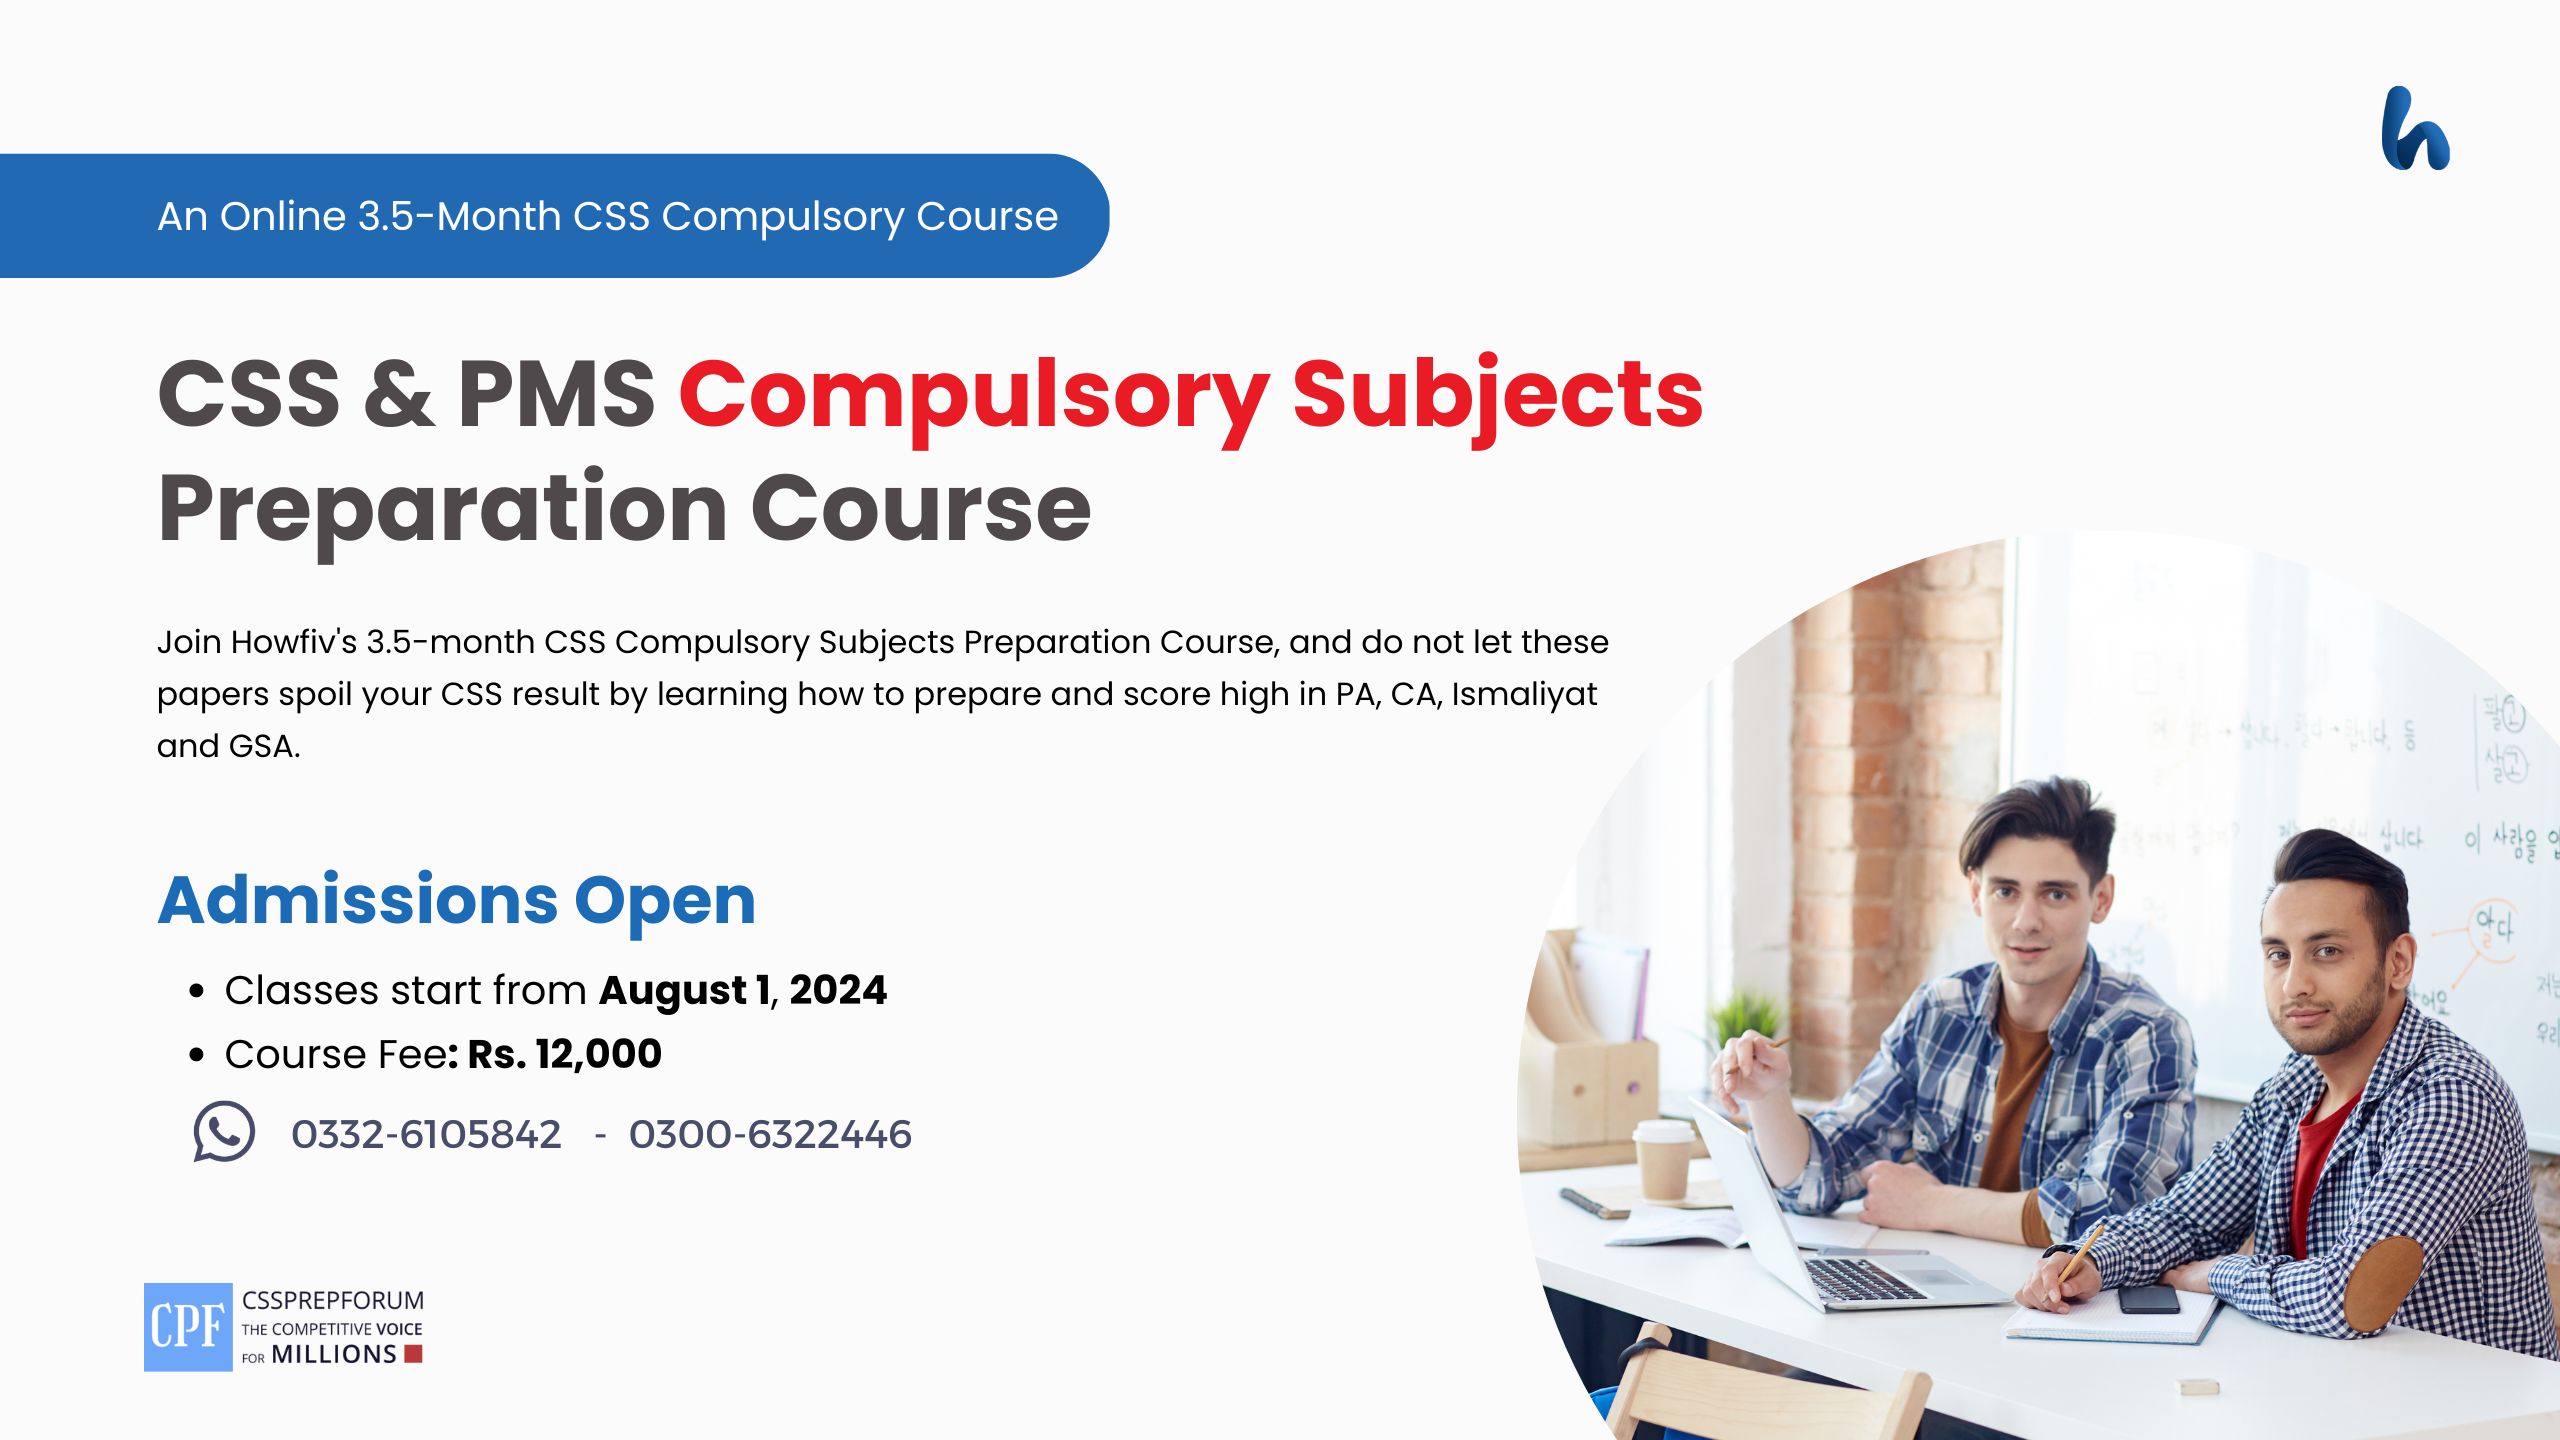 CSS Compulsory Subjects Preparation Course